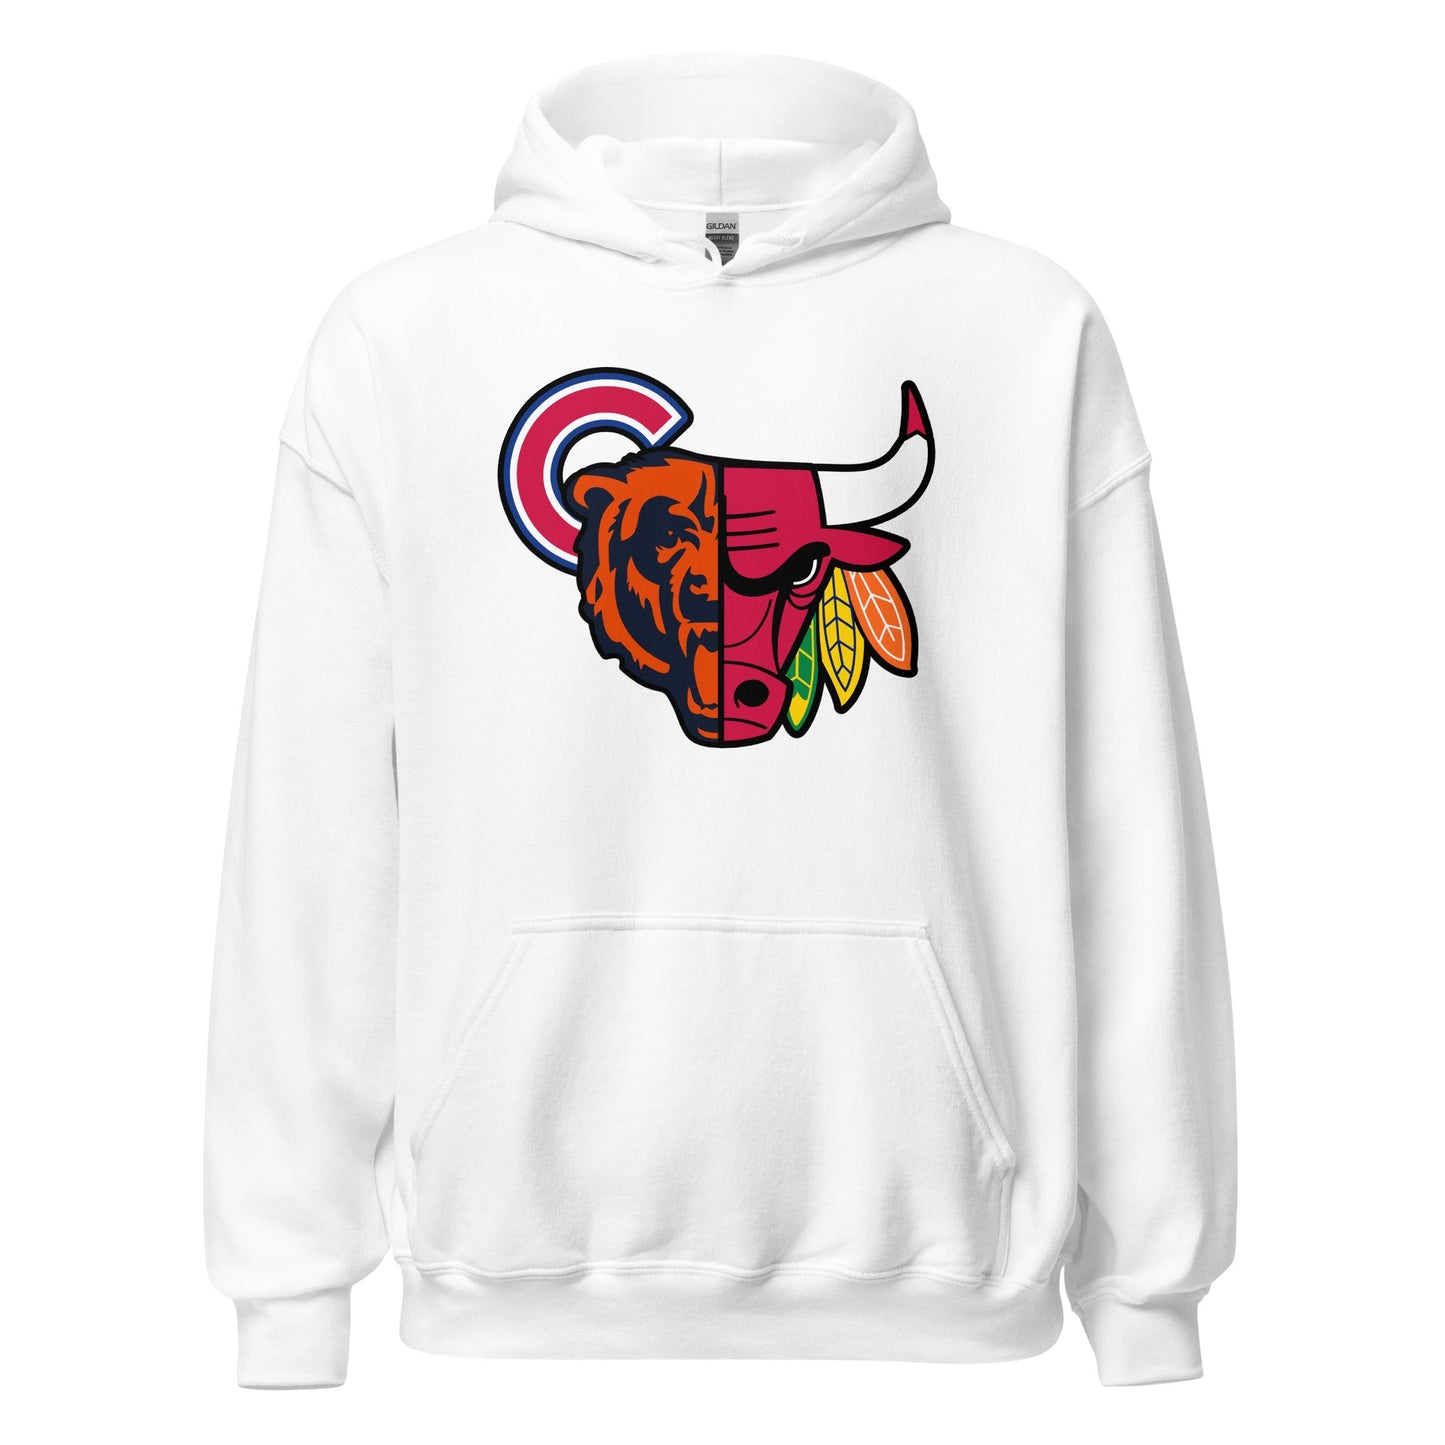 CHI (Cubs) Hoodie - Full Color